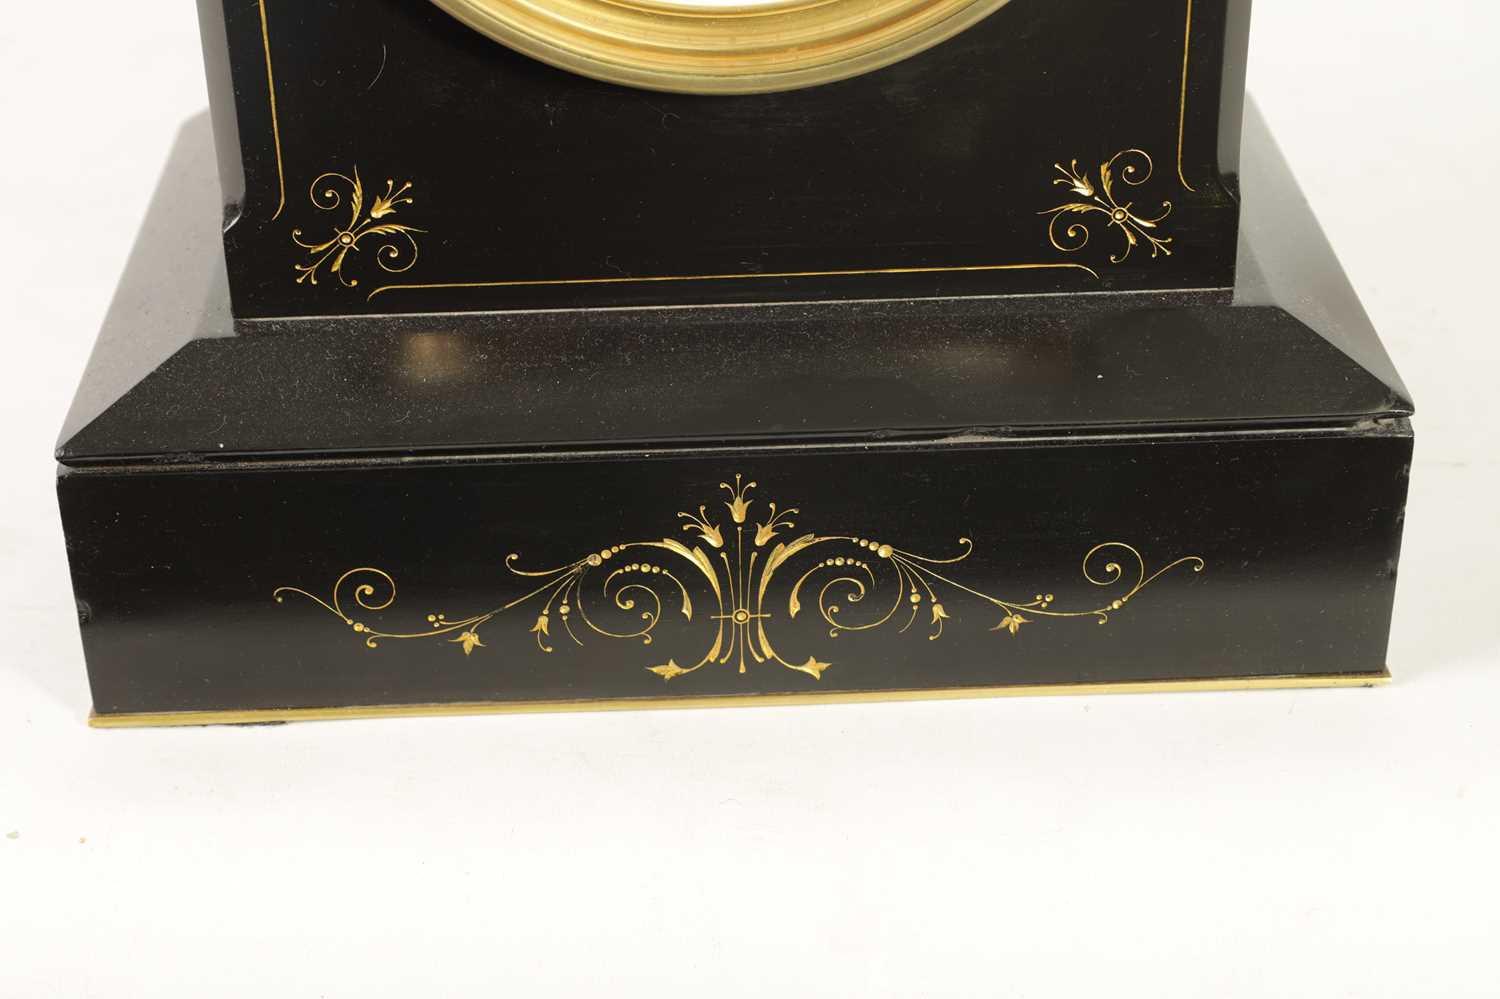 A LATE 19TH CENTURY QUARTER CHIMING BLACK SLATE MARBLE MANTEL CLOCK - Image 2 of 7